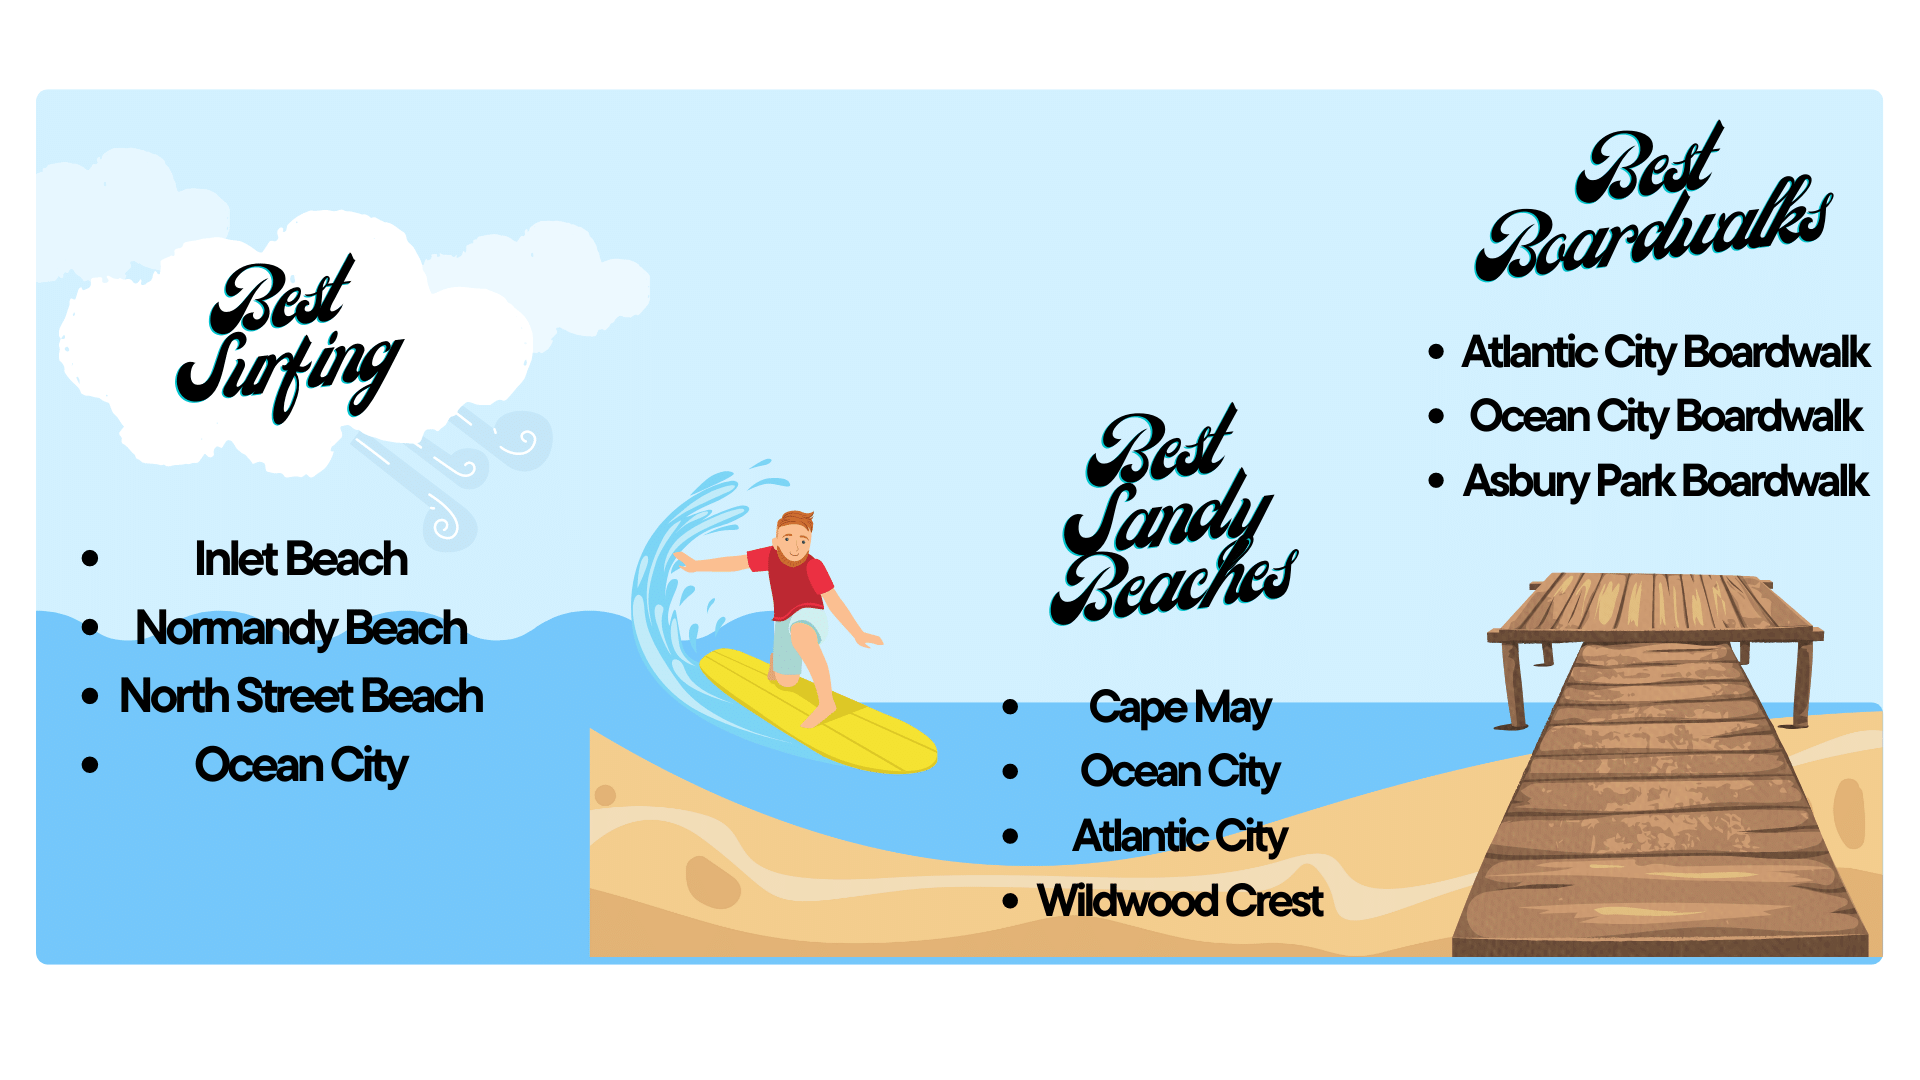 Best Beaches in New Jersey graphic with surfer and boardwalk